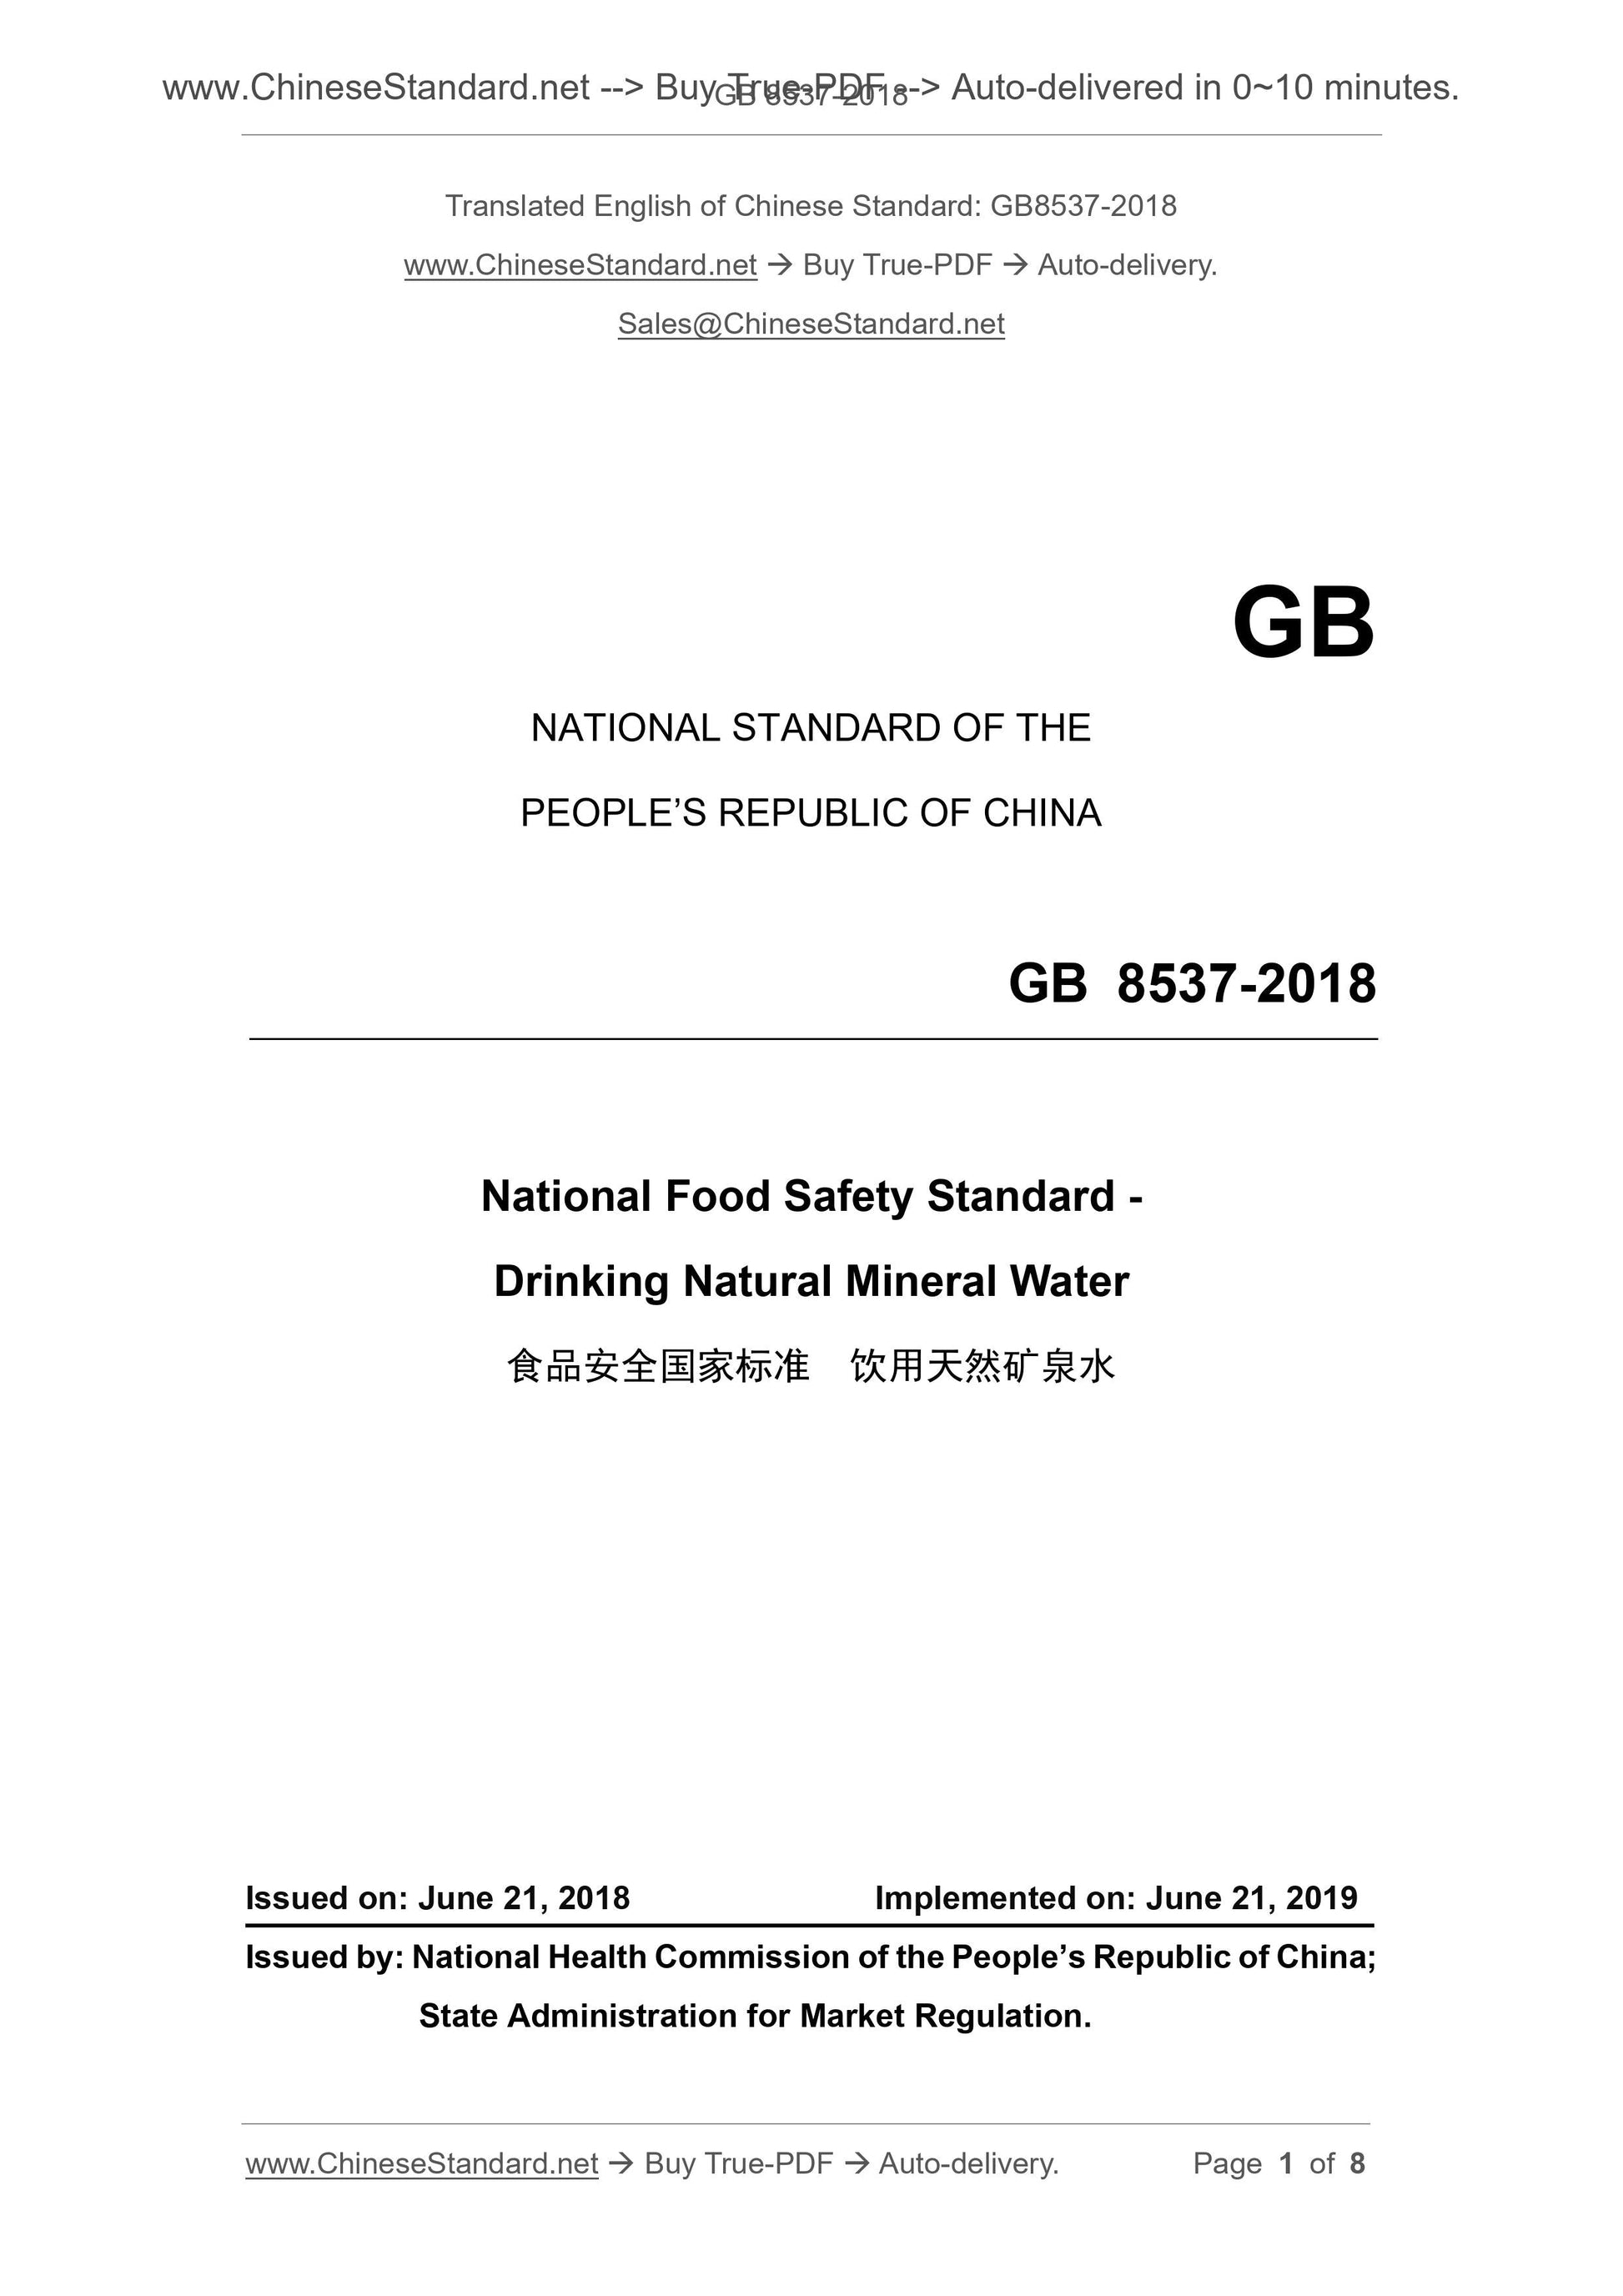 GB 8537-2018 Page 1